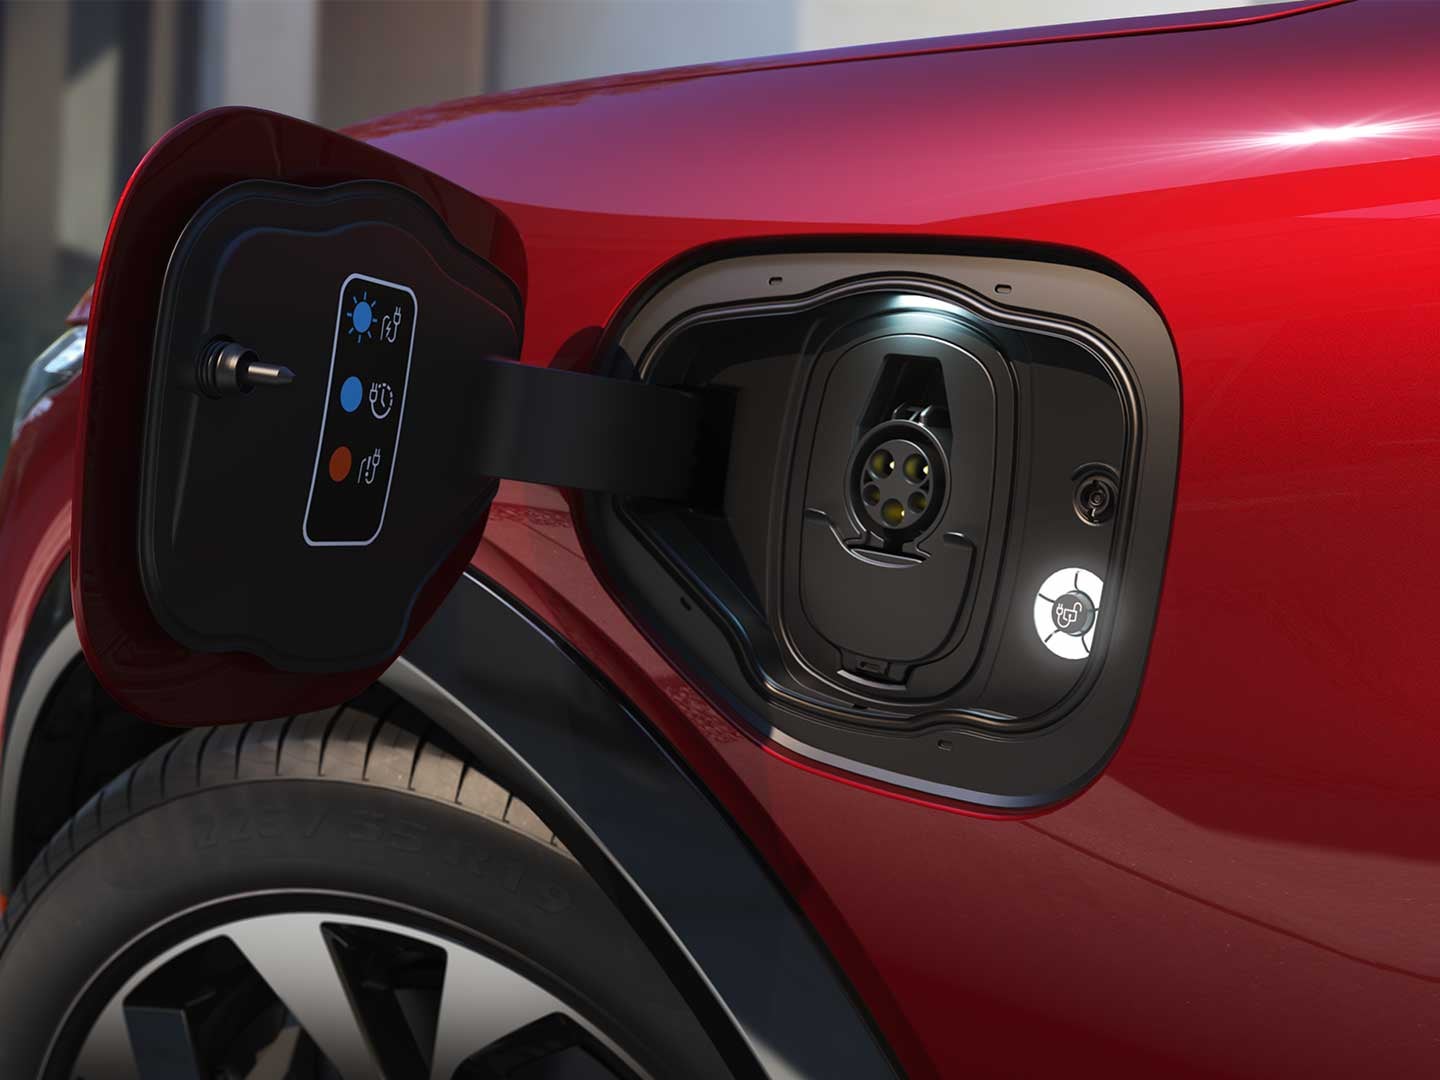 Shot of the charging port of a Ford Mach-E, which is an electric vehicle